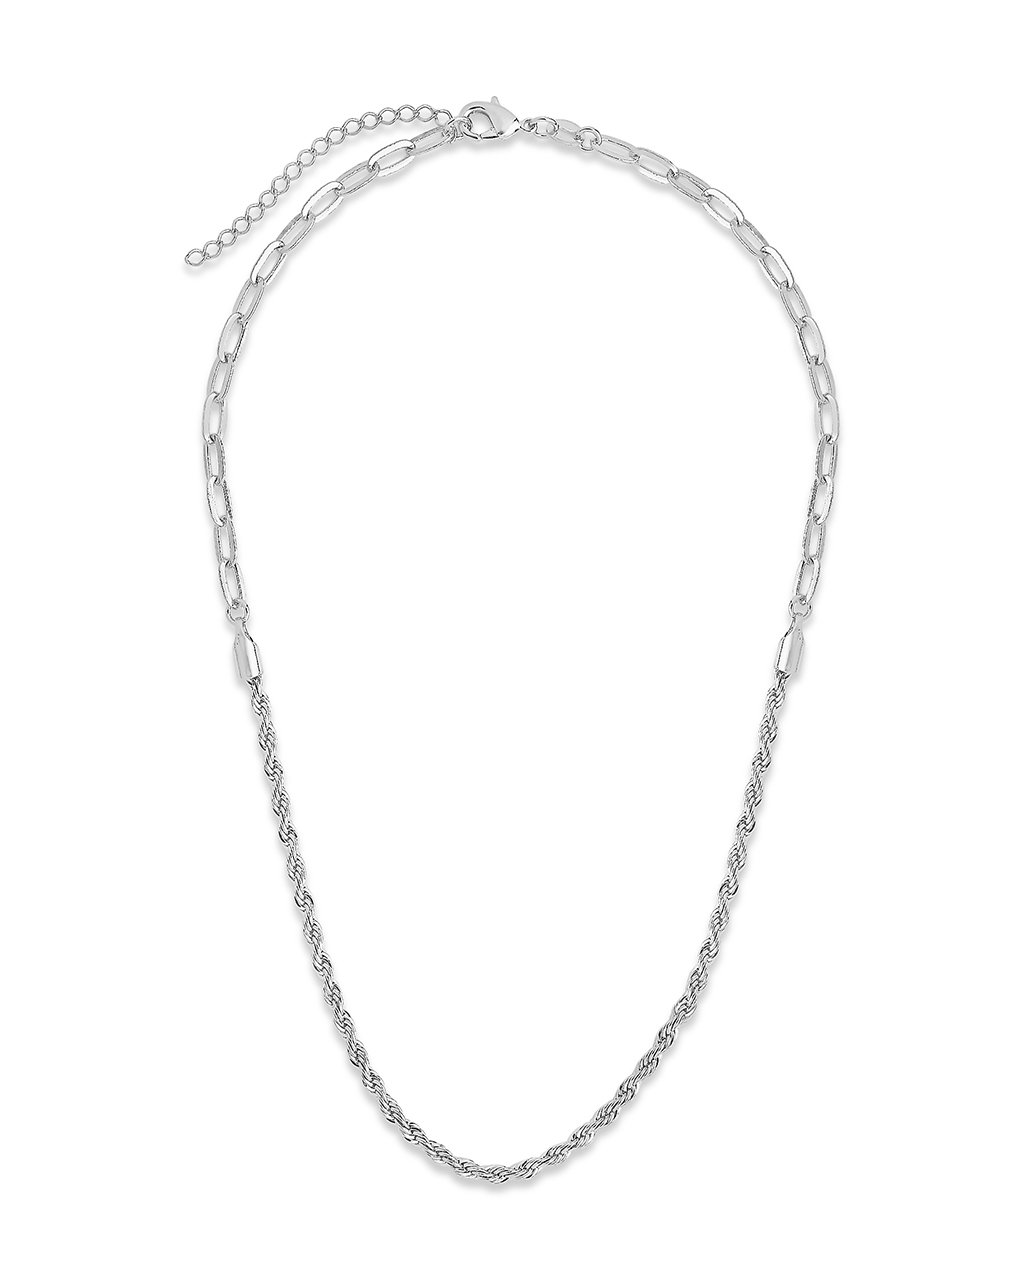 Rope Twist Chain Necklace Sterling Forever 